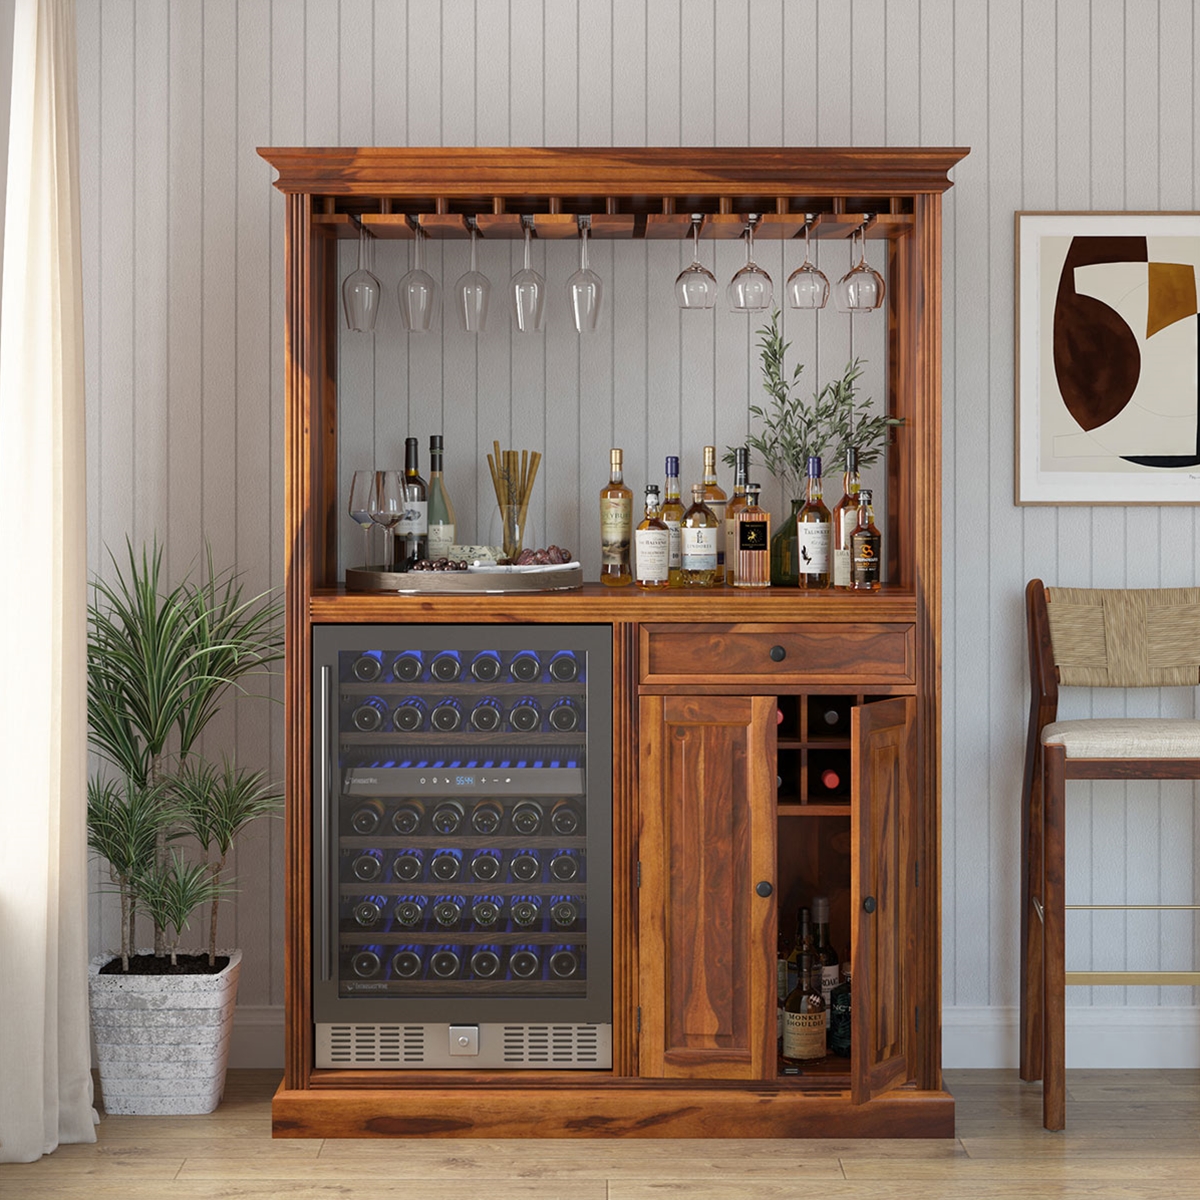 https://www.sierralivingconcepts.com/images/thumbs/0390666_houston-solid-wood-home-bar-cabinet-with-fridge-space.jpeg